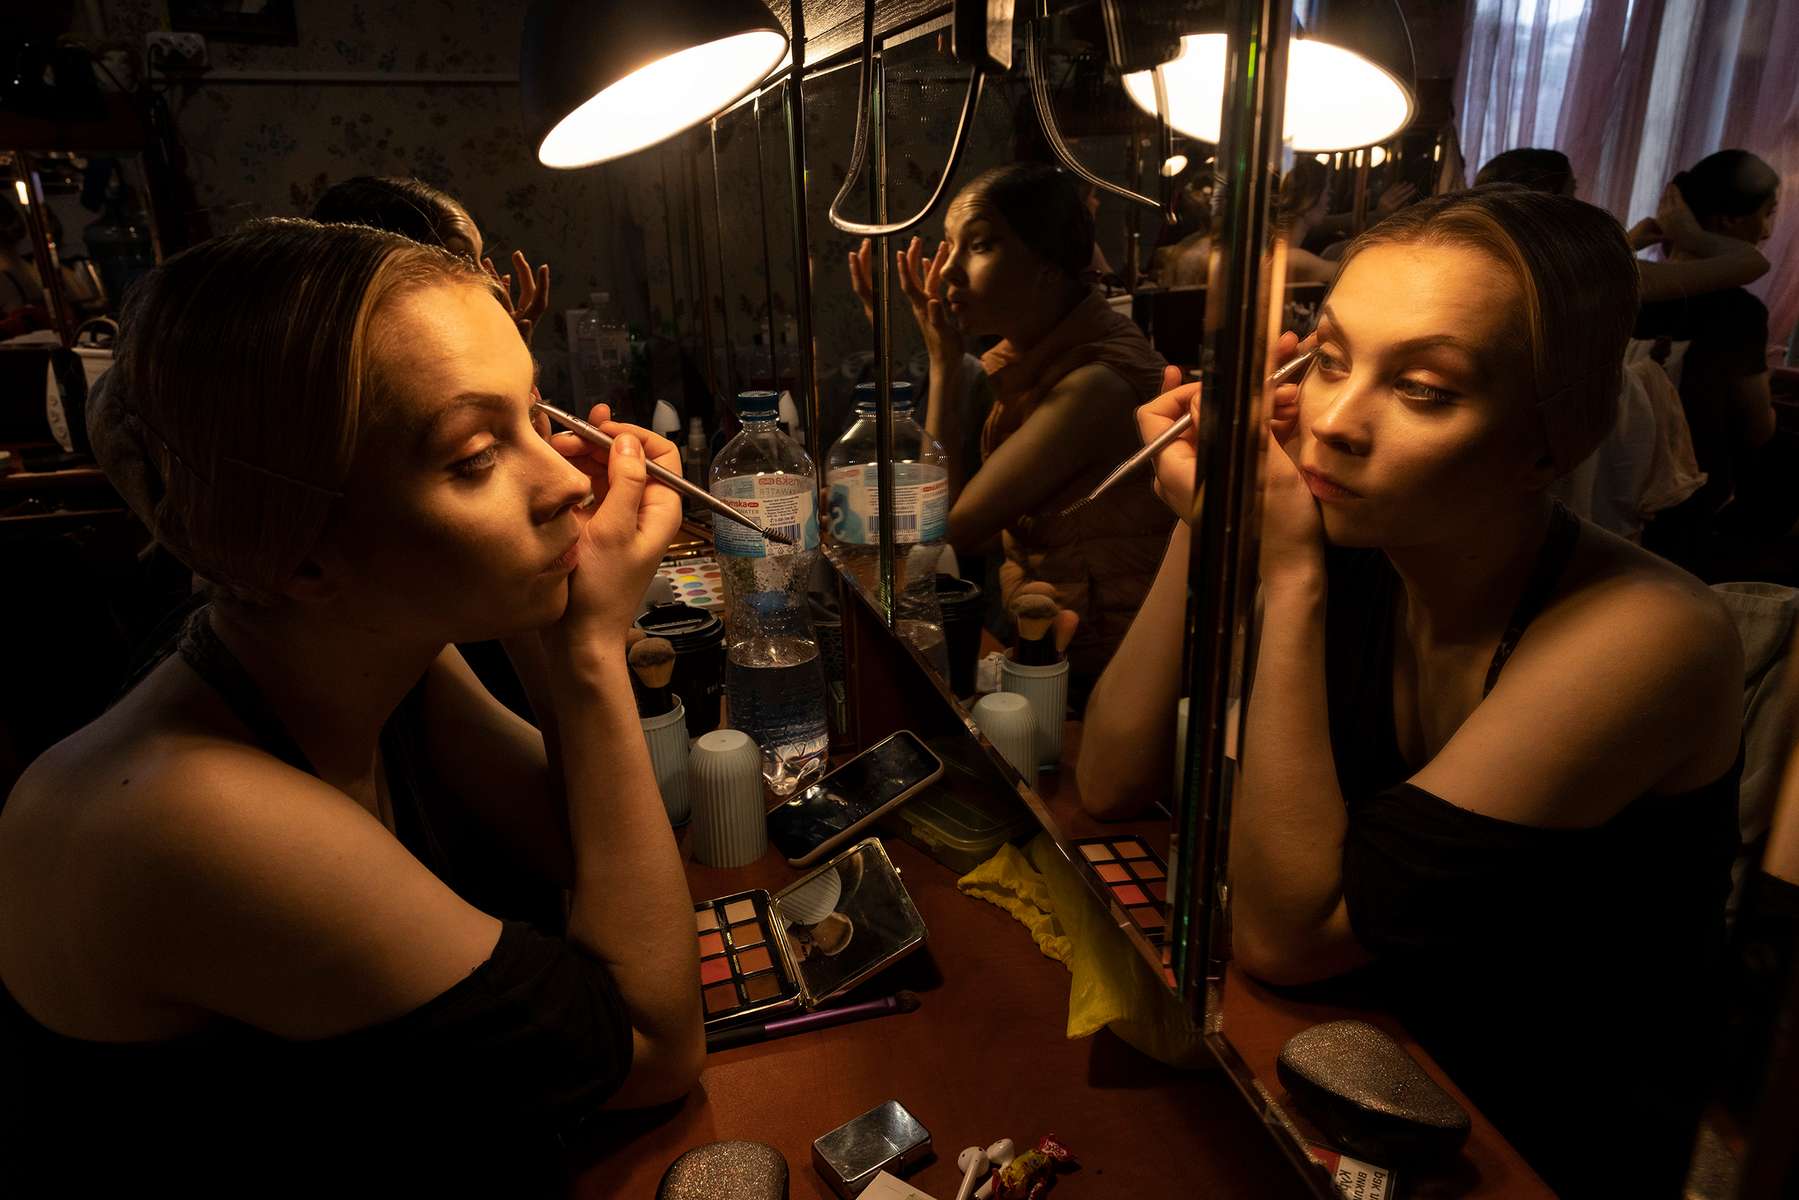 LVIV, UKRAINE - Ballet dancer Romana Pumanska puts on makeup backstage for the performance of Giselle June 10, 2022 in Lviv, Ukraine. The Lviv National Opera house started performances last month for both ballet and opera.The bomb shelter can only hold 300 people so tickets are limited incase a siren goes off during the performance. (Photo by Paula Bronstein /Getty Images)